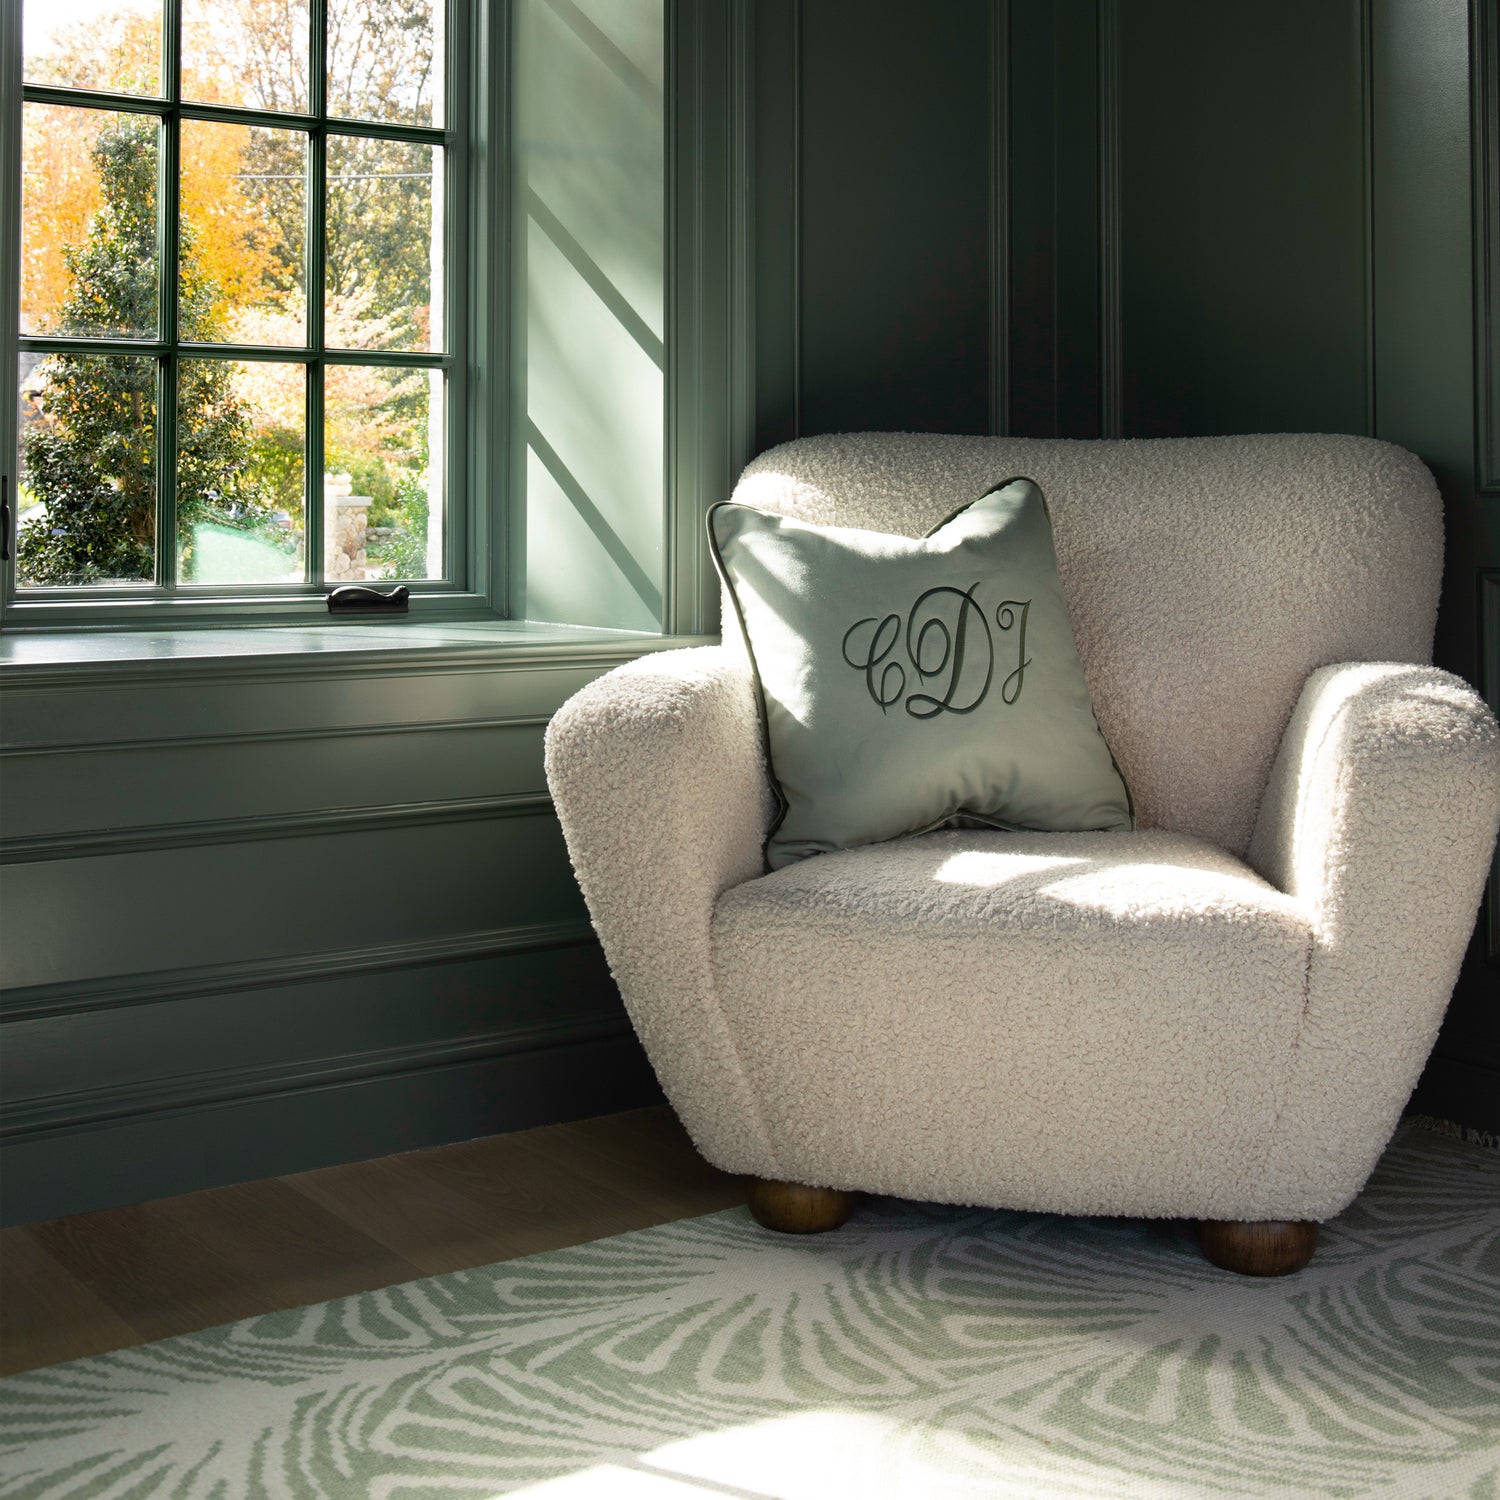 Corner close-up of white sofa chair with Sage Green Monogrammed Pillow on top next to illuminated window and Sage Green Printed Rug on wooden floor